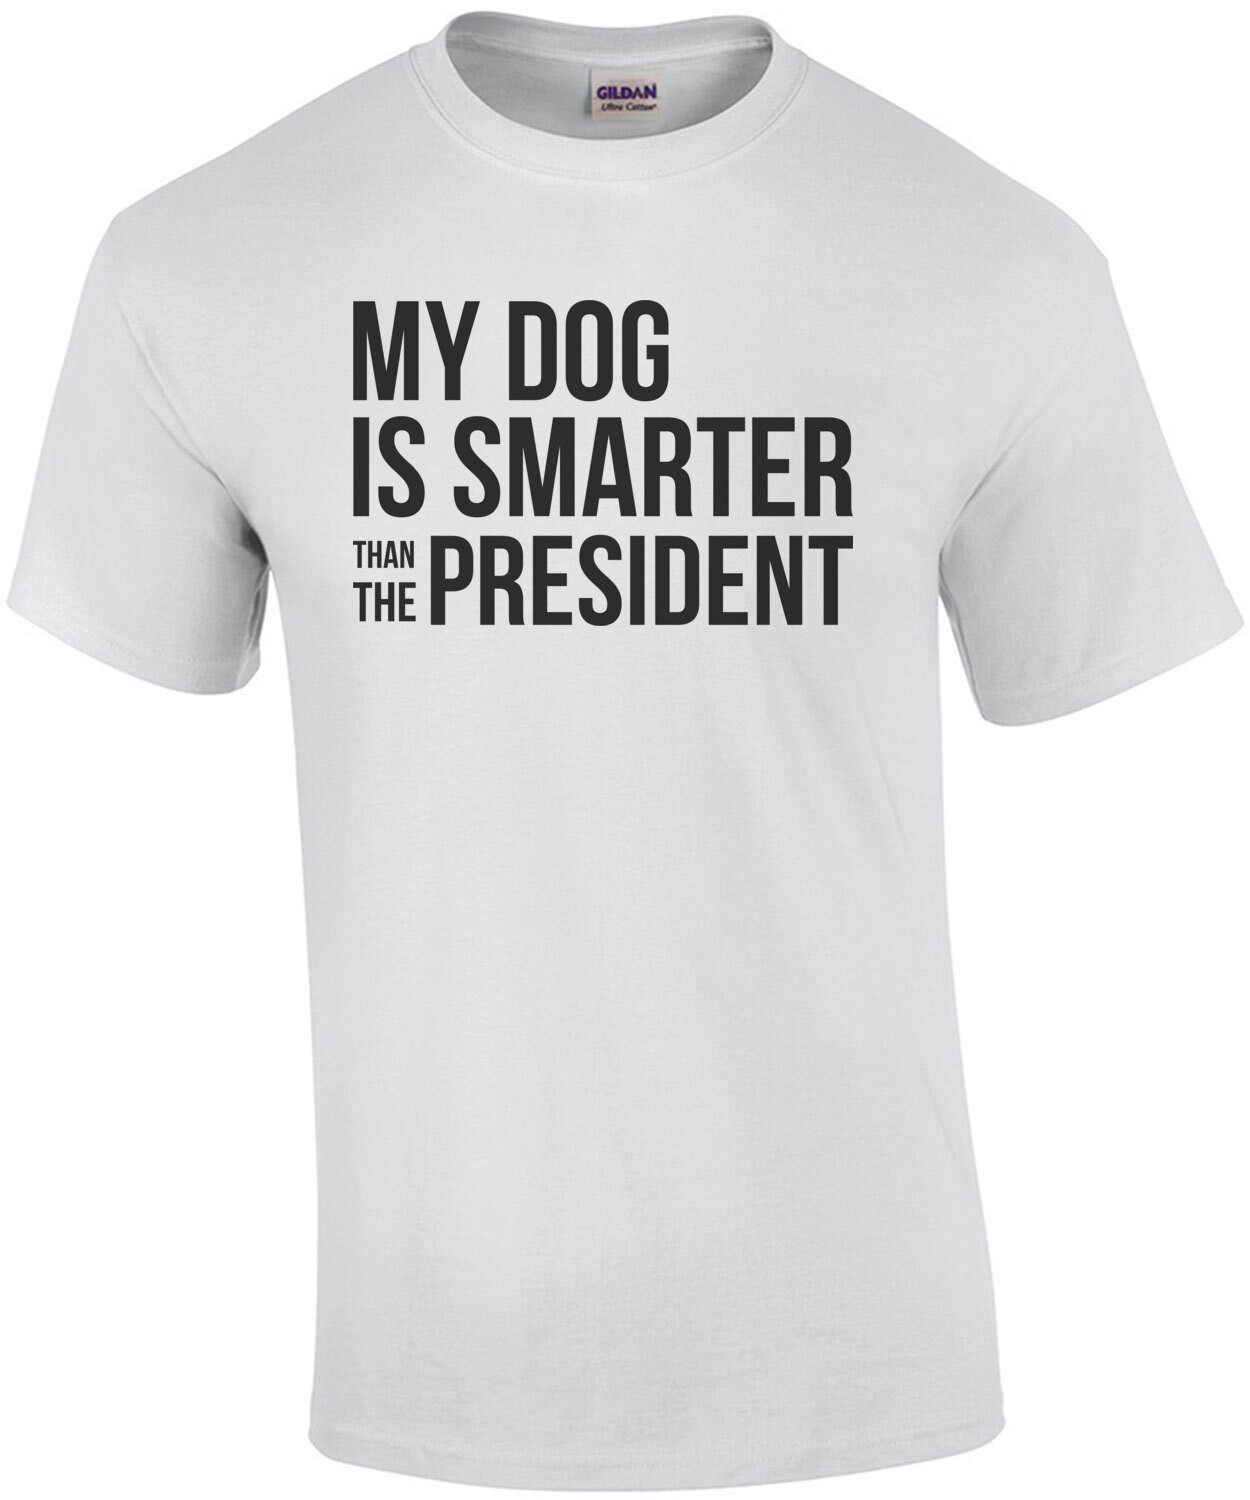 My dog is smarter than the president - funny political t-shirt